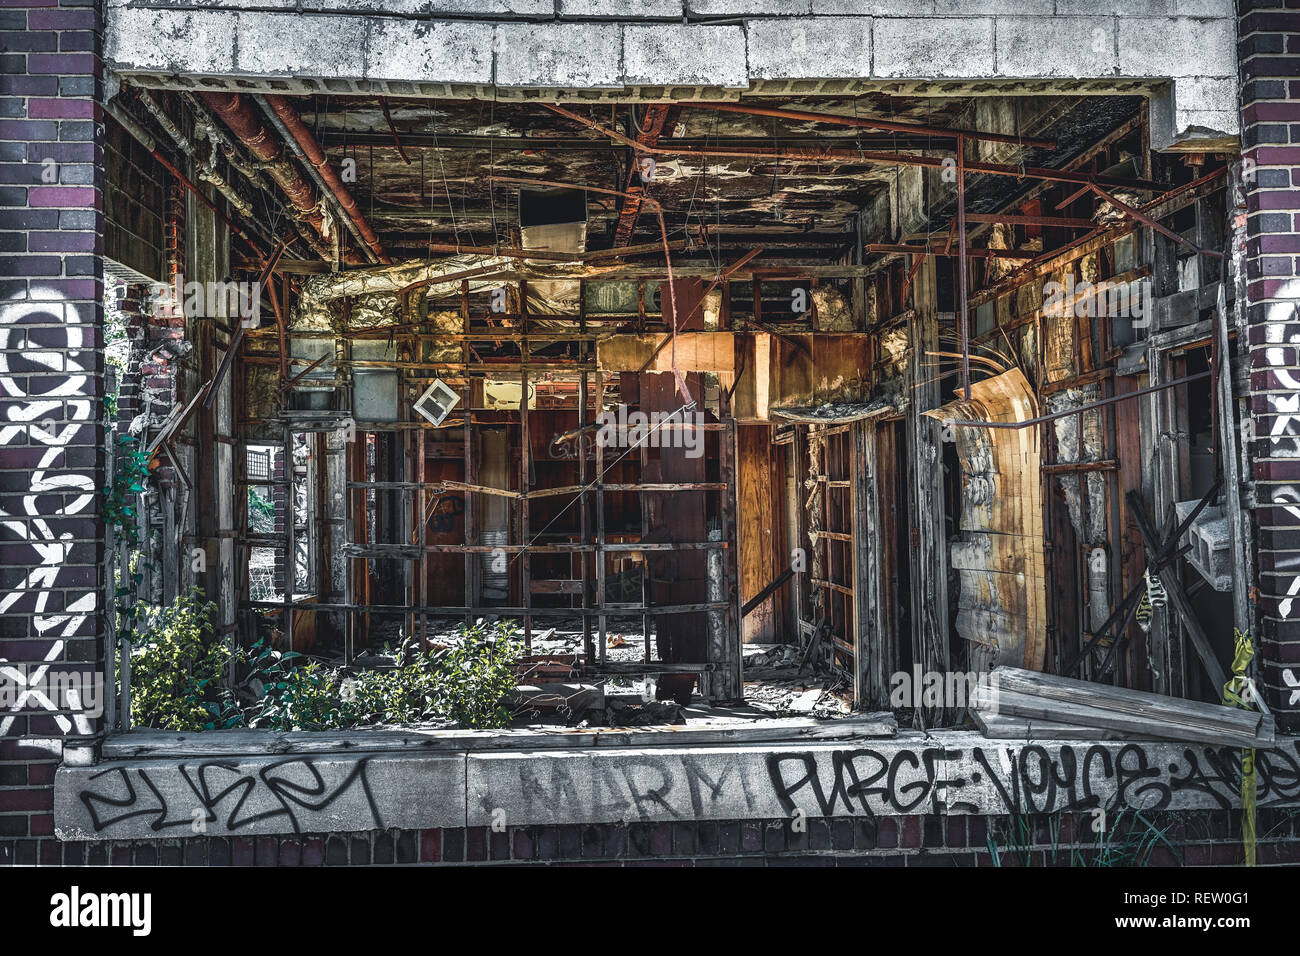 Detroit, Michigan, United States - October 2018: View of the abandoned Packard Automotive Plant in Detroit. The Packard Plant sprawls multiple city Stock Photo